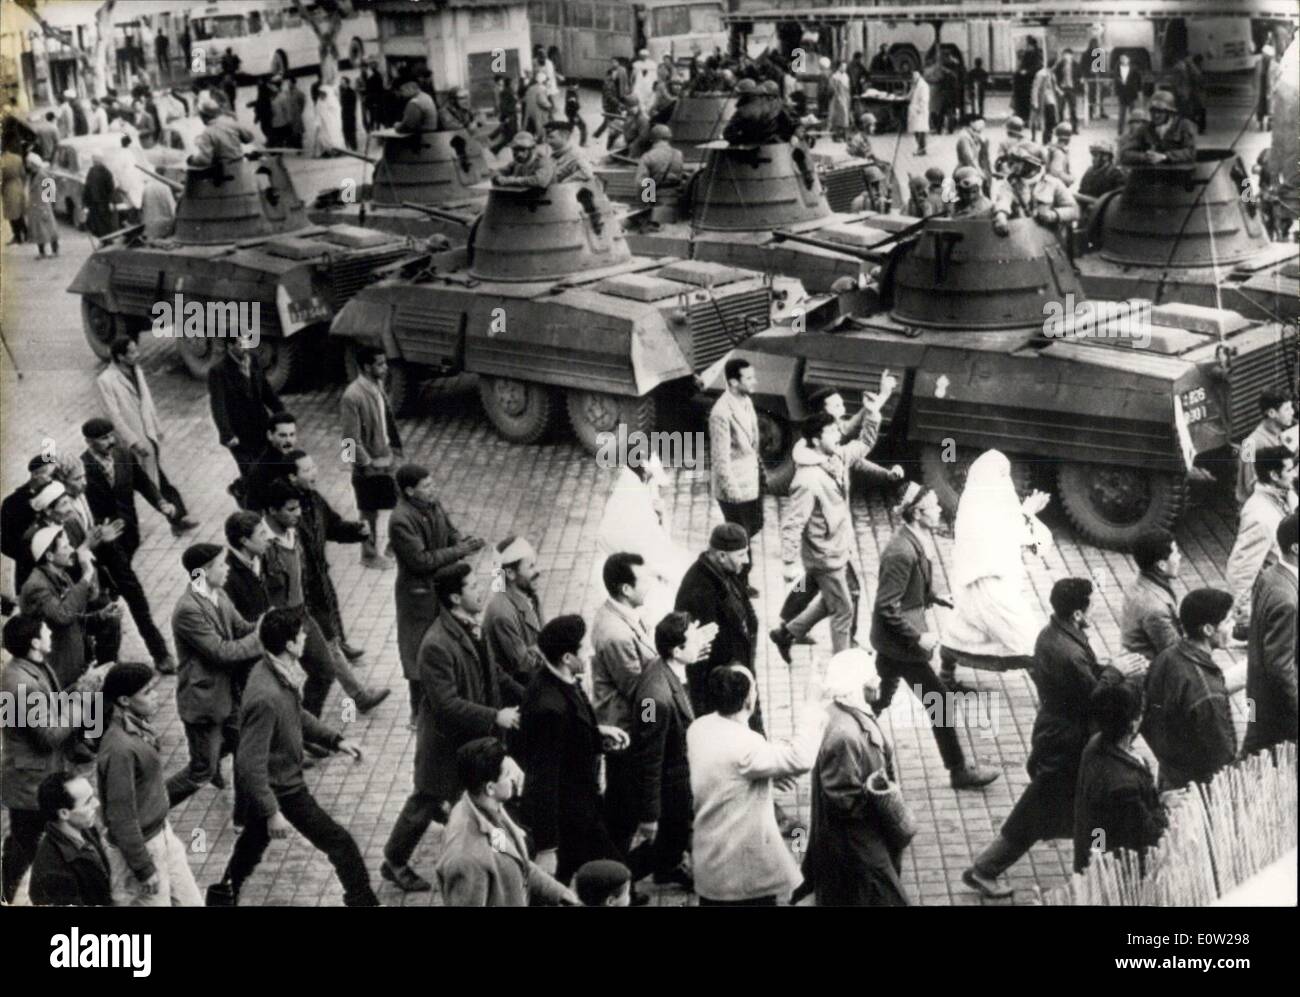 Dec. 15, 1960 - Algiers: Unrest Continues: Photo Shows Native demnonstrators pass unchallanged before heavy tanks surrounding the native section. Stock Photo